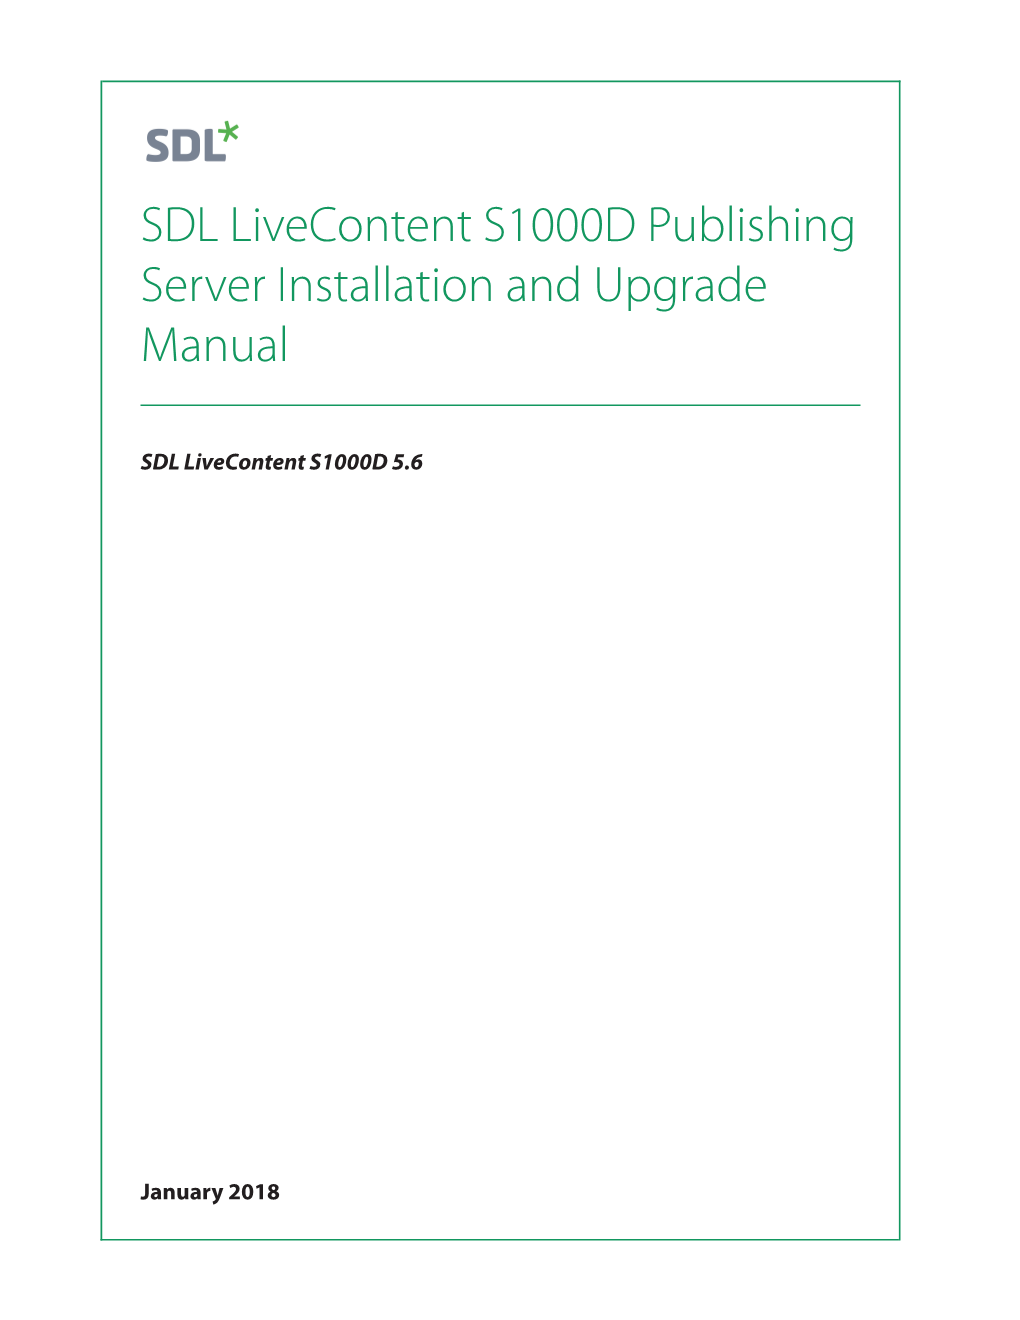 SDL Livecontent S1000D Publishing Server Installation and Upgrade Manual